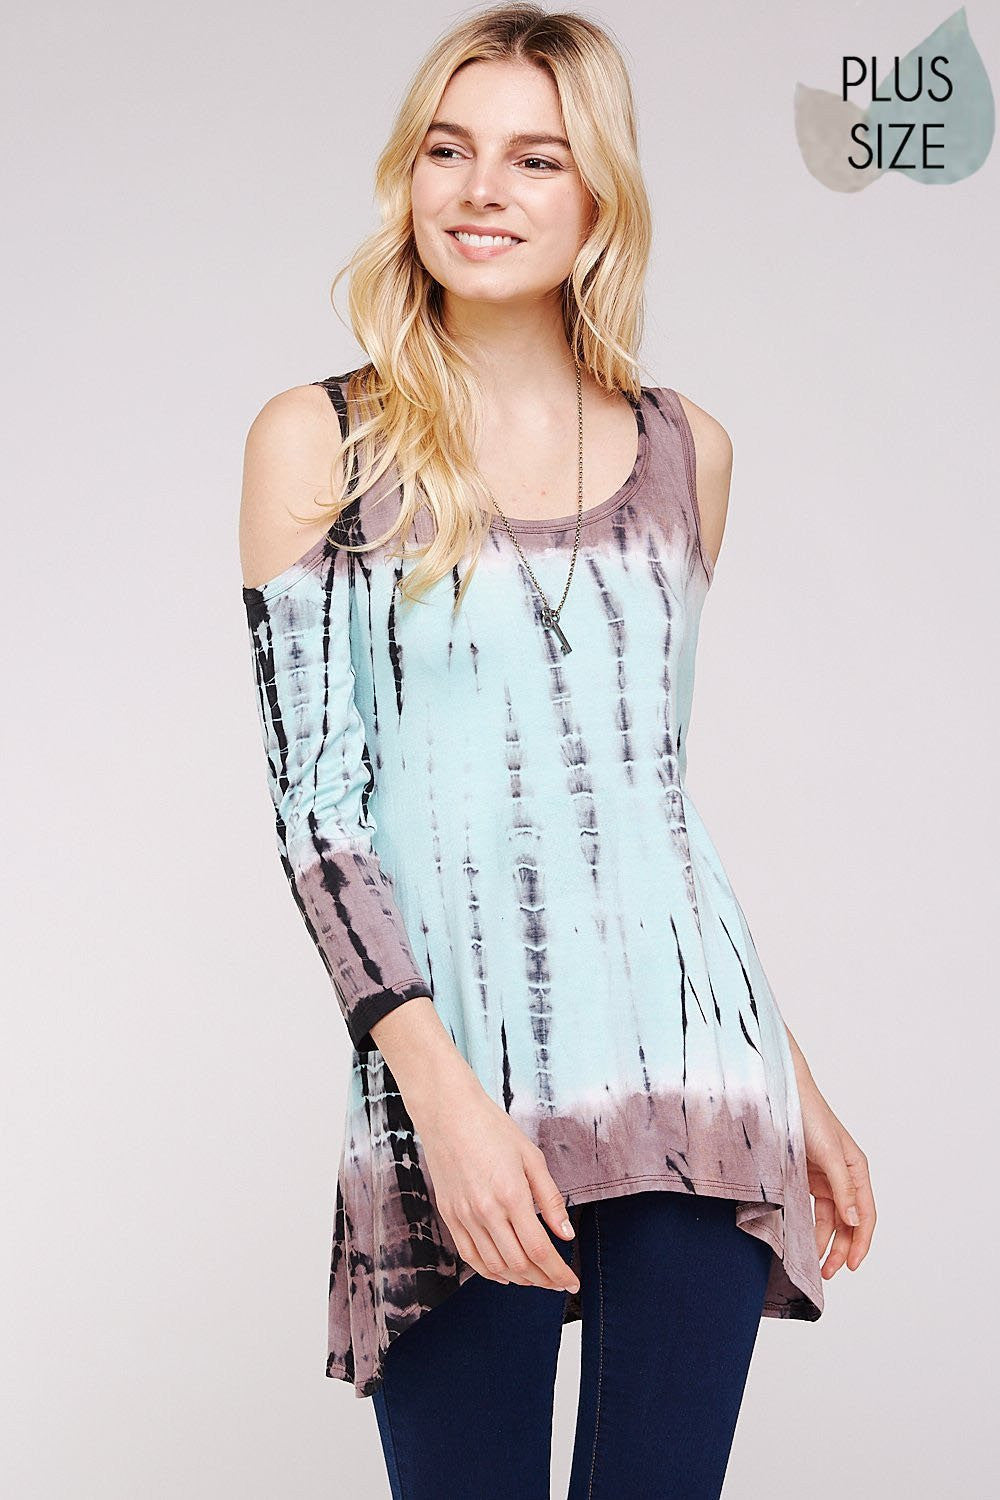 beautiful woman wearing a Mocha & Mint Bamboo Tie-dye cold shoulder 3/4 sleeve tunic top Perfect during spring, summer,Concerts, Festivals, Dance, Brunch, Shopping, Weekend Getaway,Evening wear, Beach Day, Vacation, Dance, Poolside Parties,Casual day